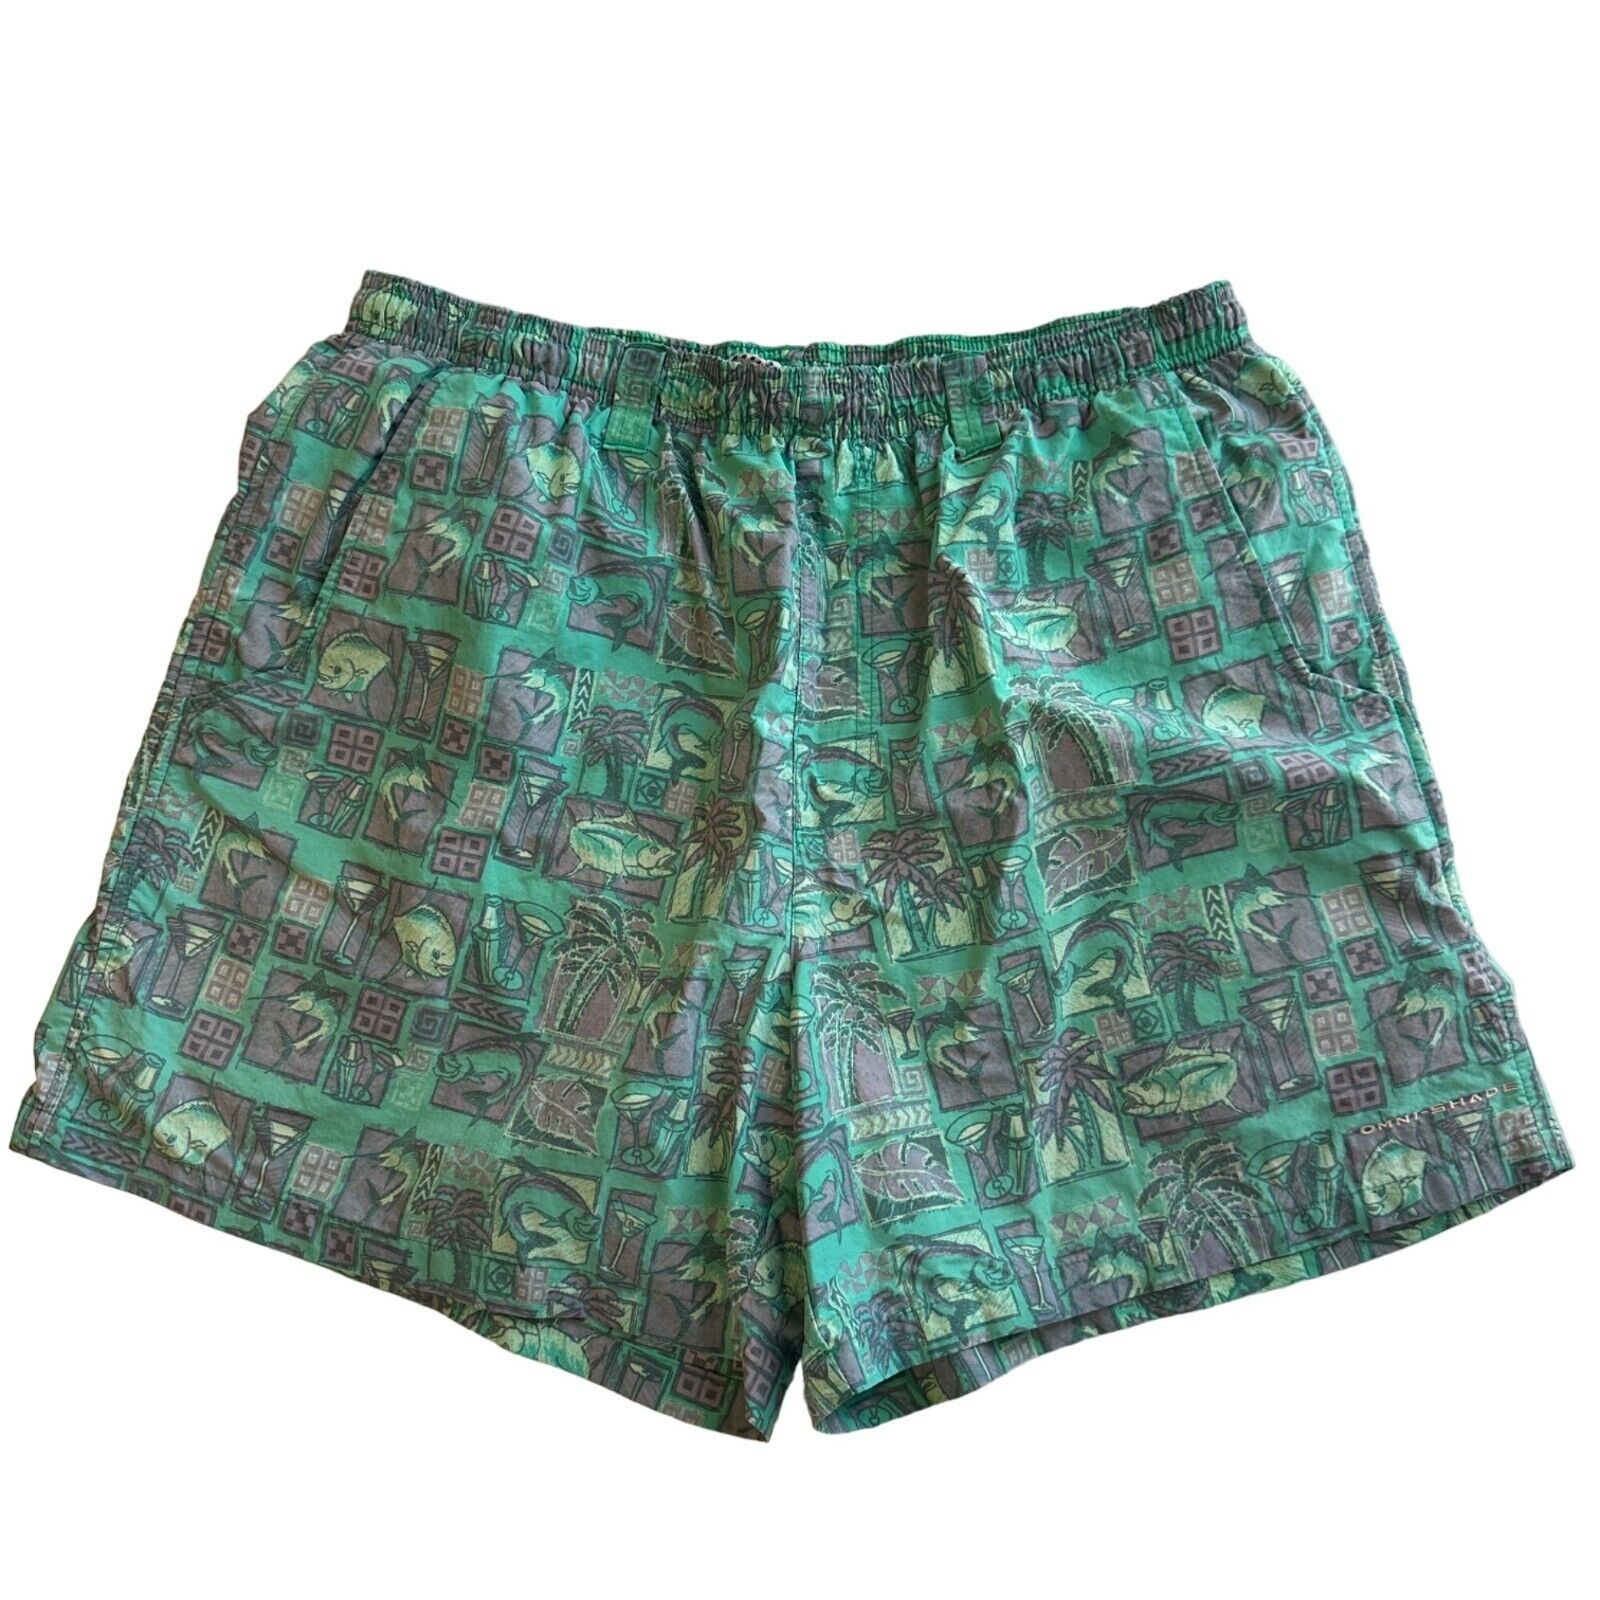 Primary image for Columbia PFG Super Backcast Lined Swim Shorts Trunks Green Pattern Mens Large